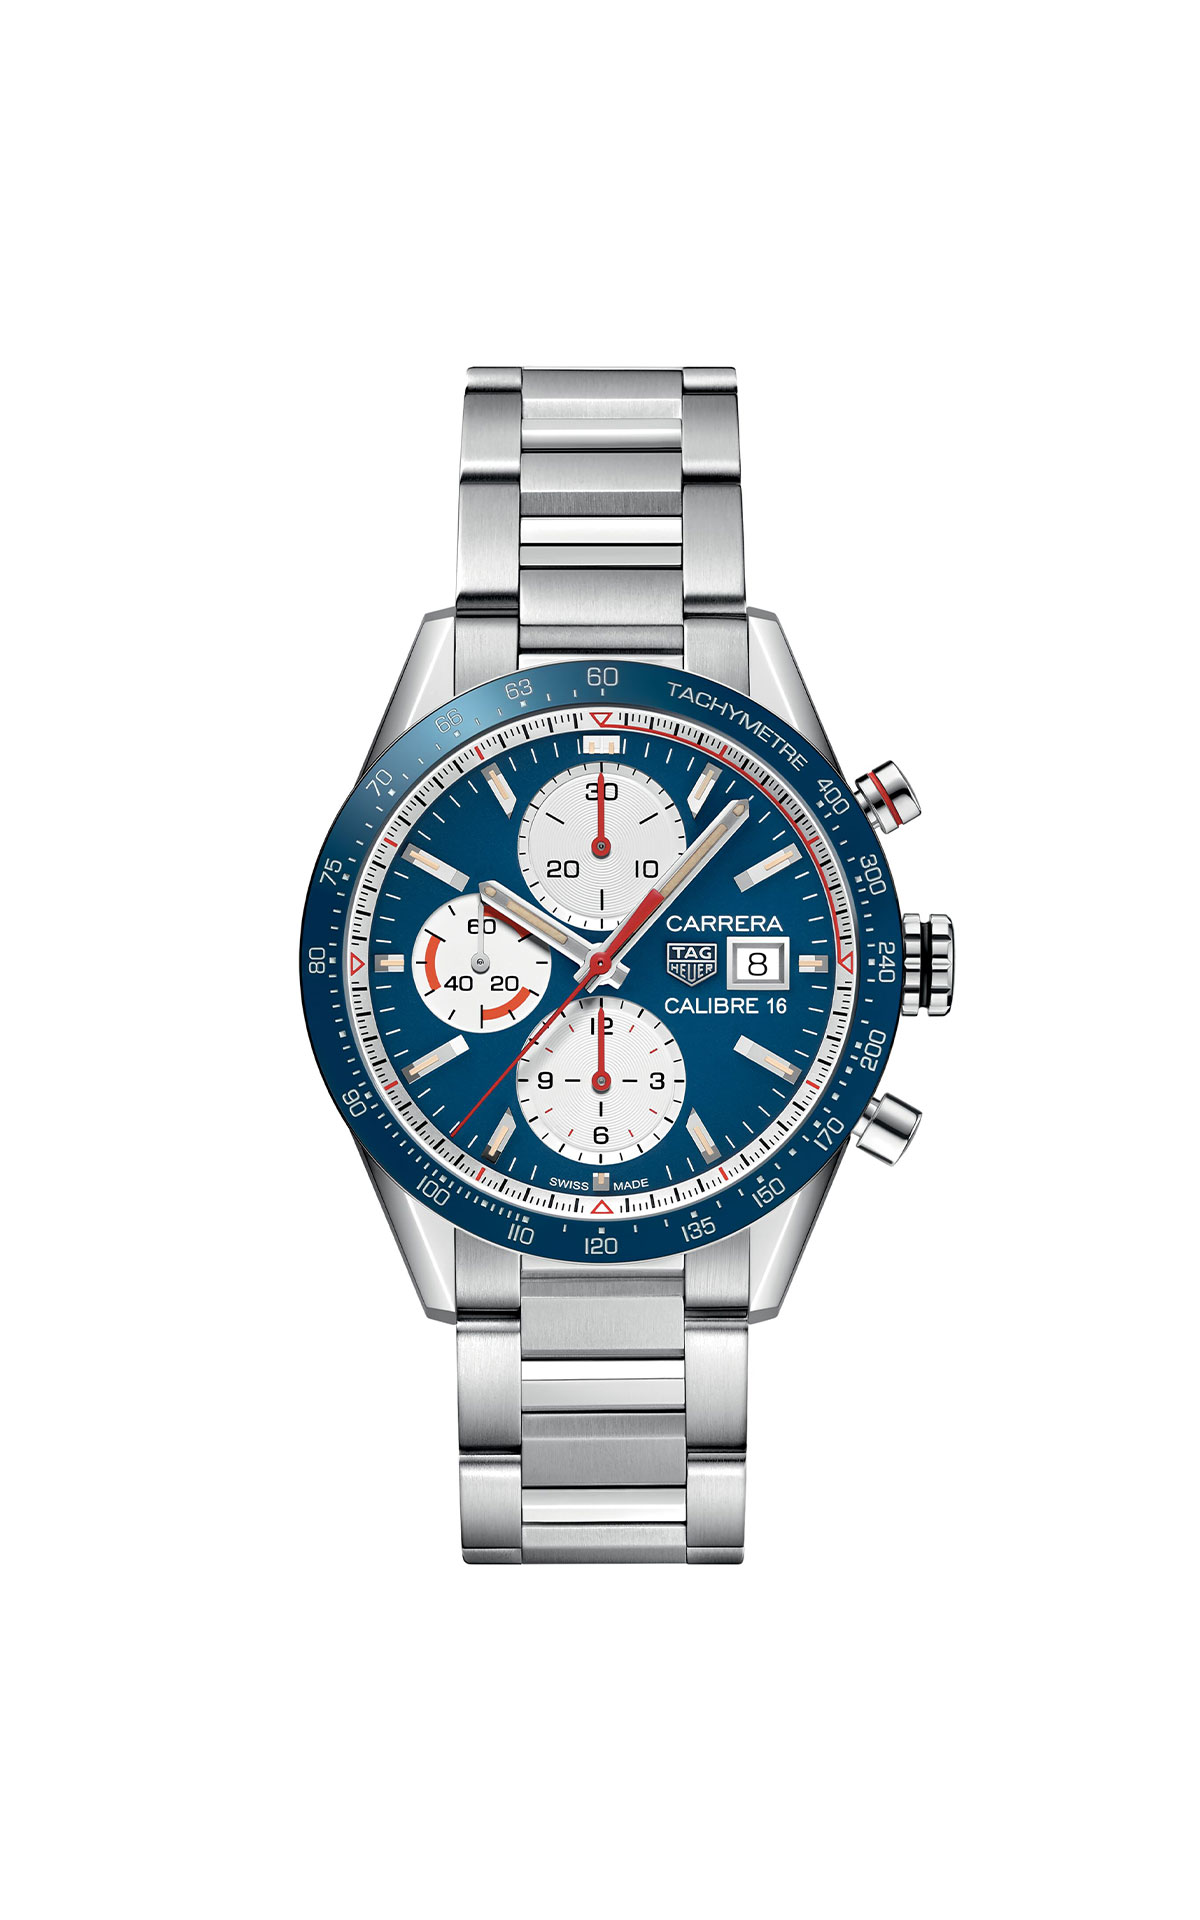 TAG Heuer Carrera calibre 16 from Bicester Village